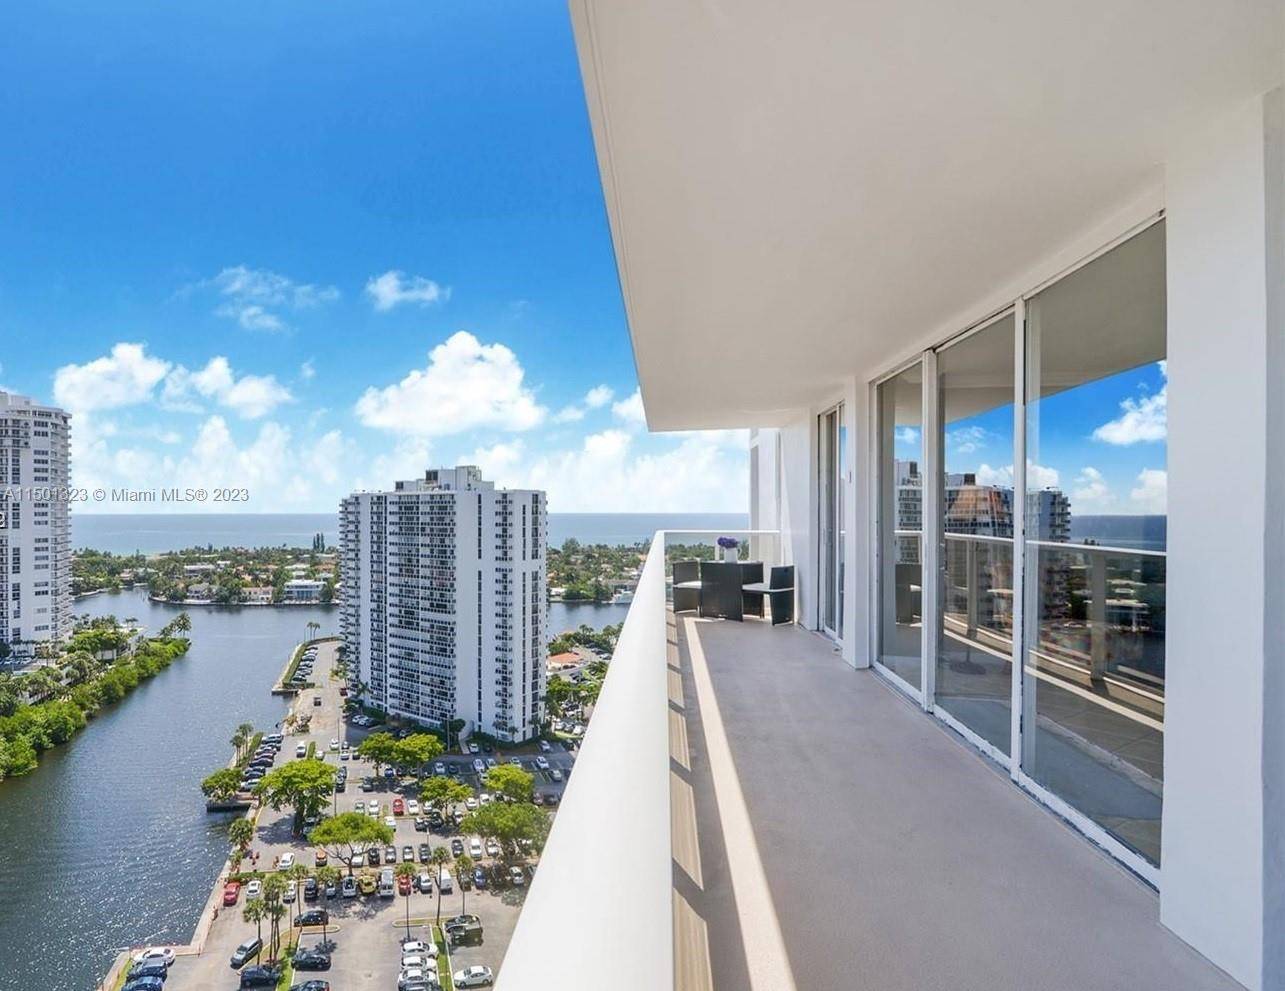 Desirable 2 bed 2 bathroom apartment with ocean and bay view in Aventura Flamenco !